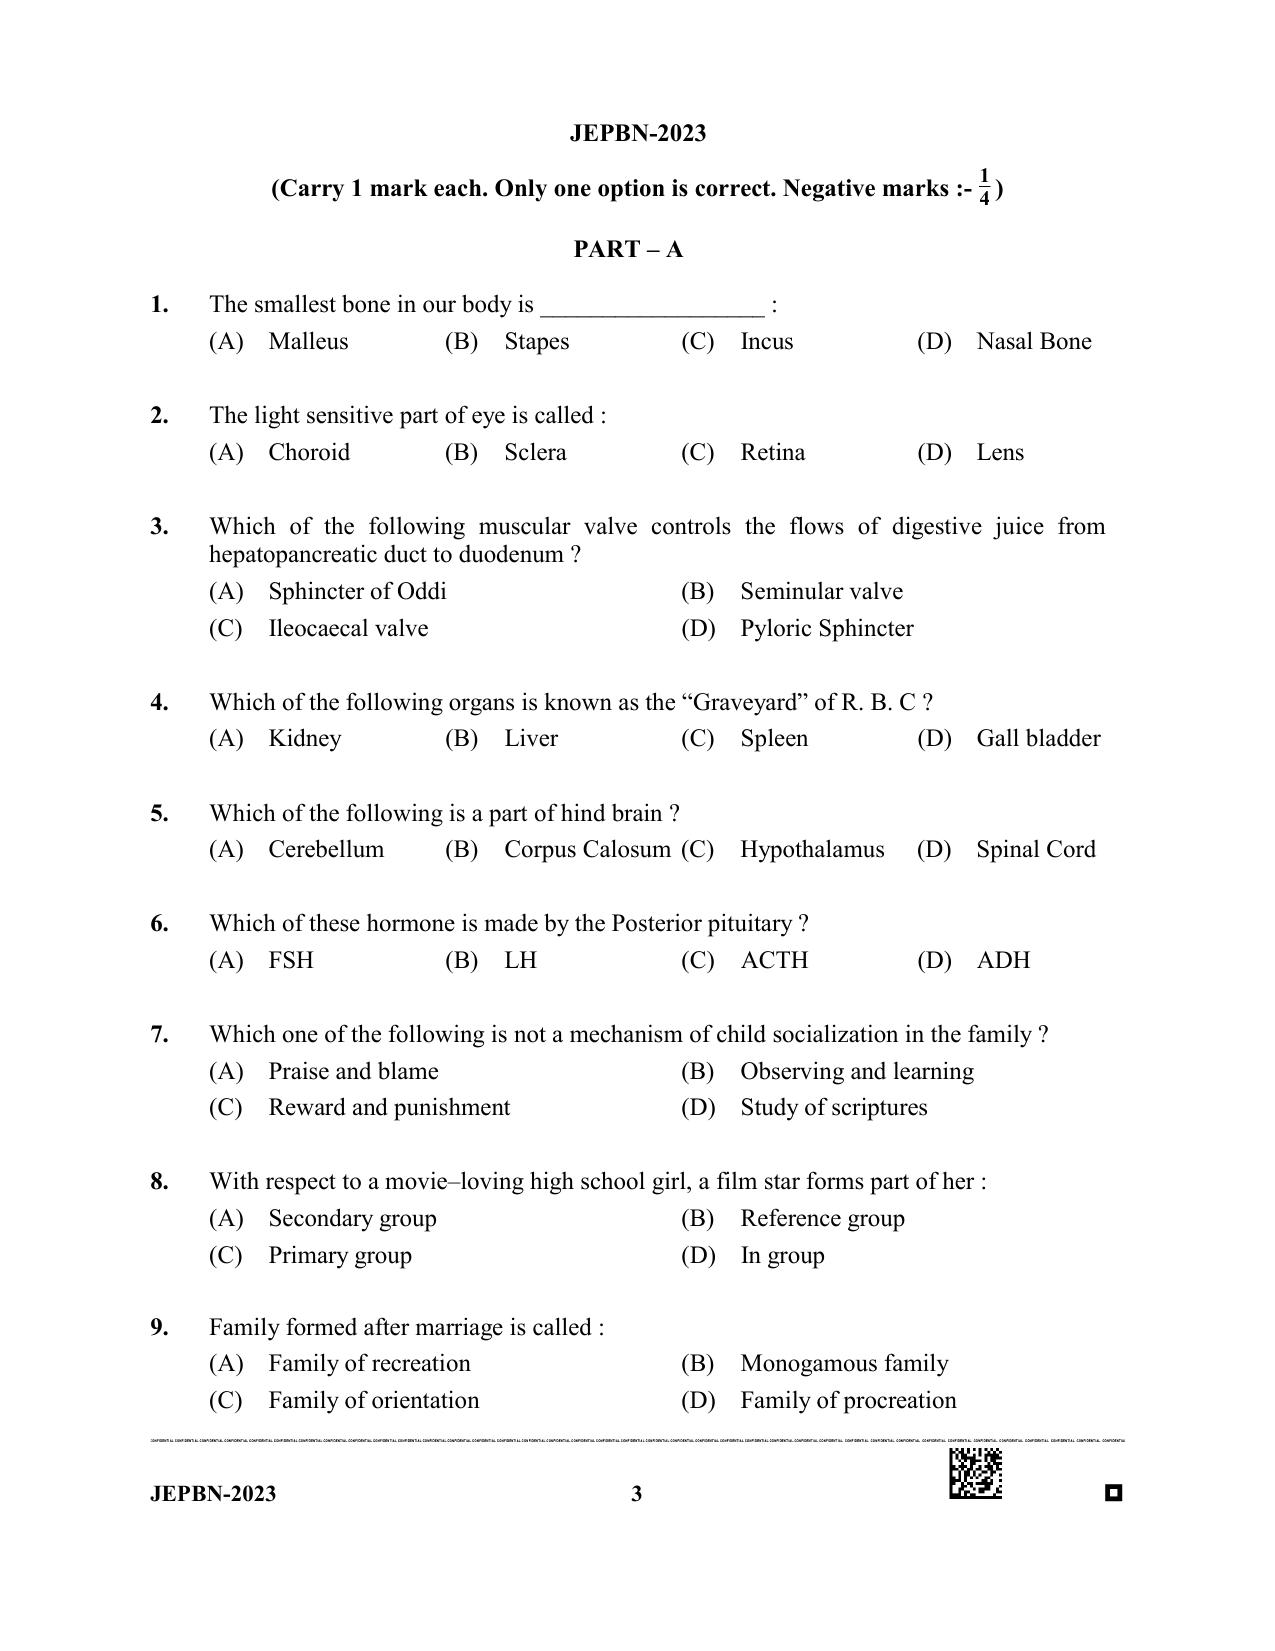 WBJEE JEPBN 2023 Question Paper - Page 3